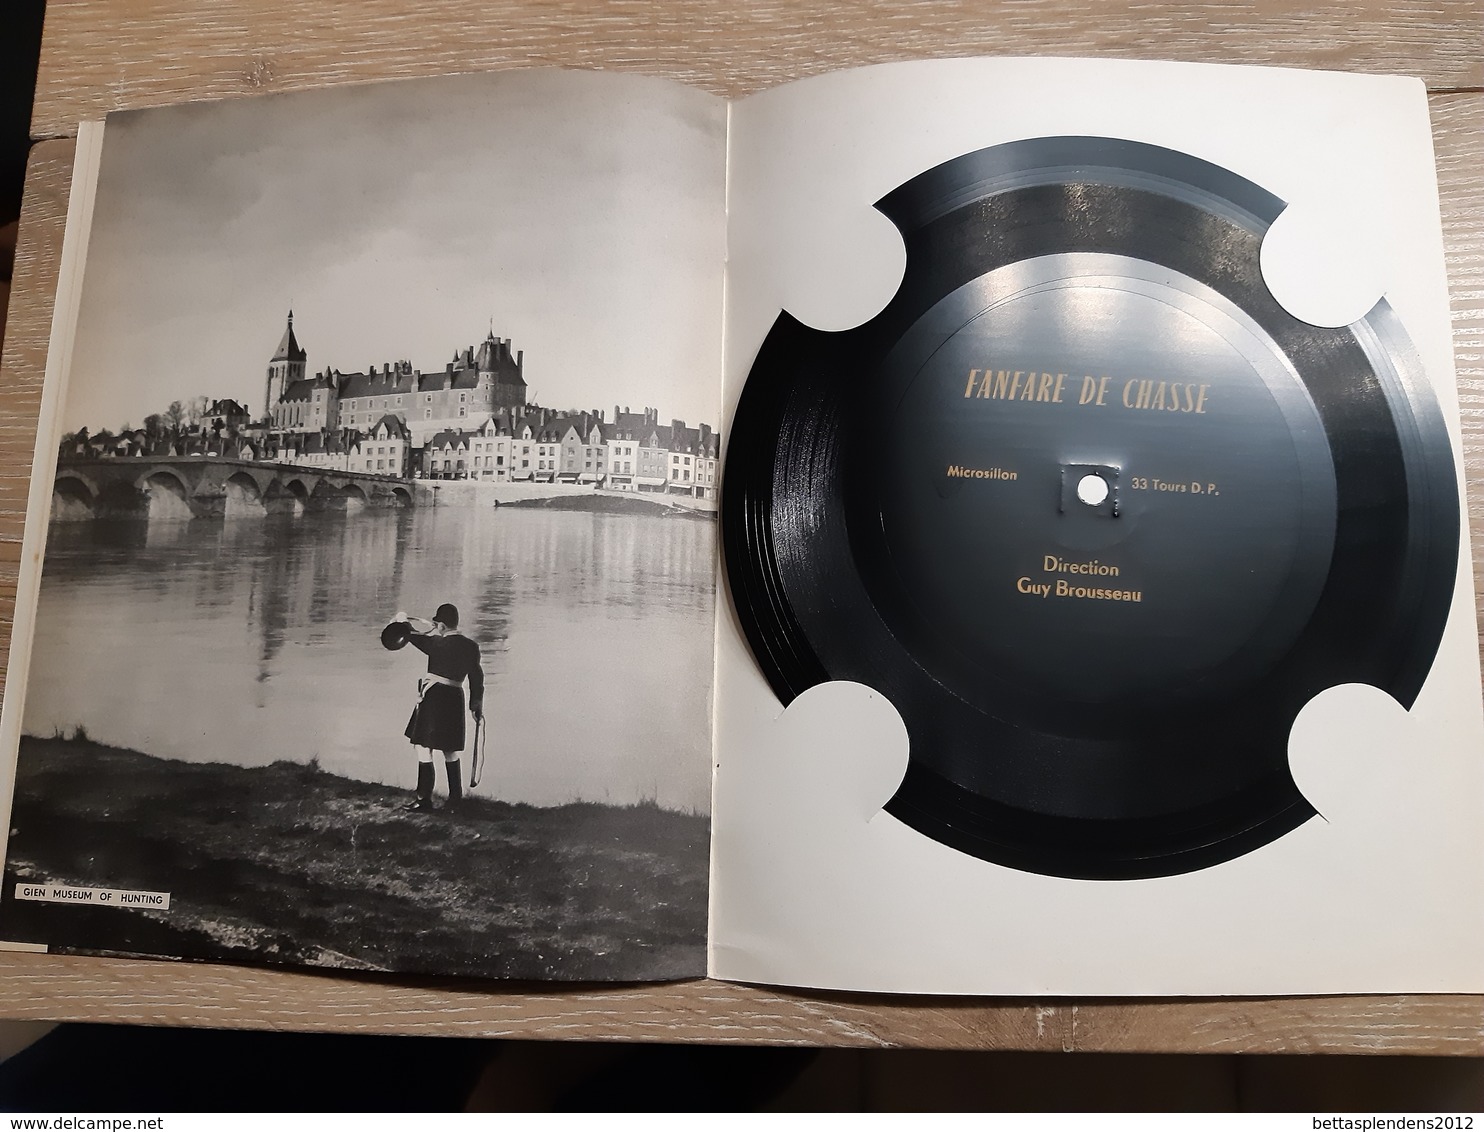 CHASSE - CHAMBORD HUNT CLUB - HUNTING IN FRANCE - COMPLET 12 PAGES ET DISQUE MOU "Fanfare De Chasse" - Other & Unclassified